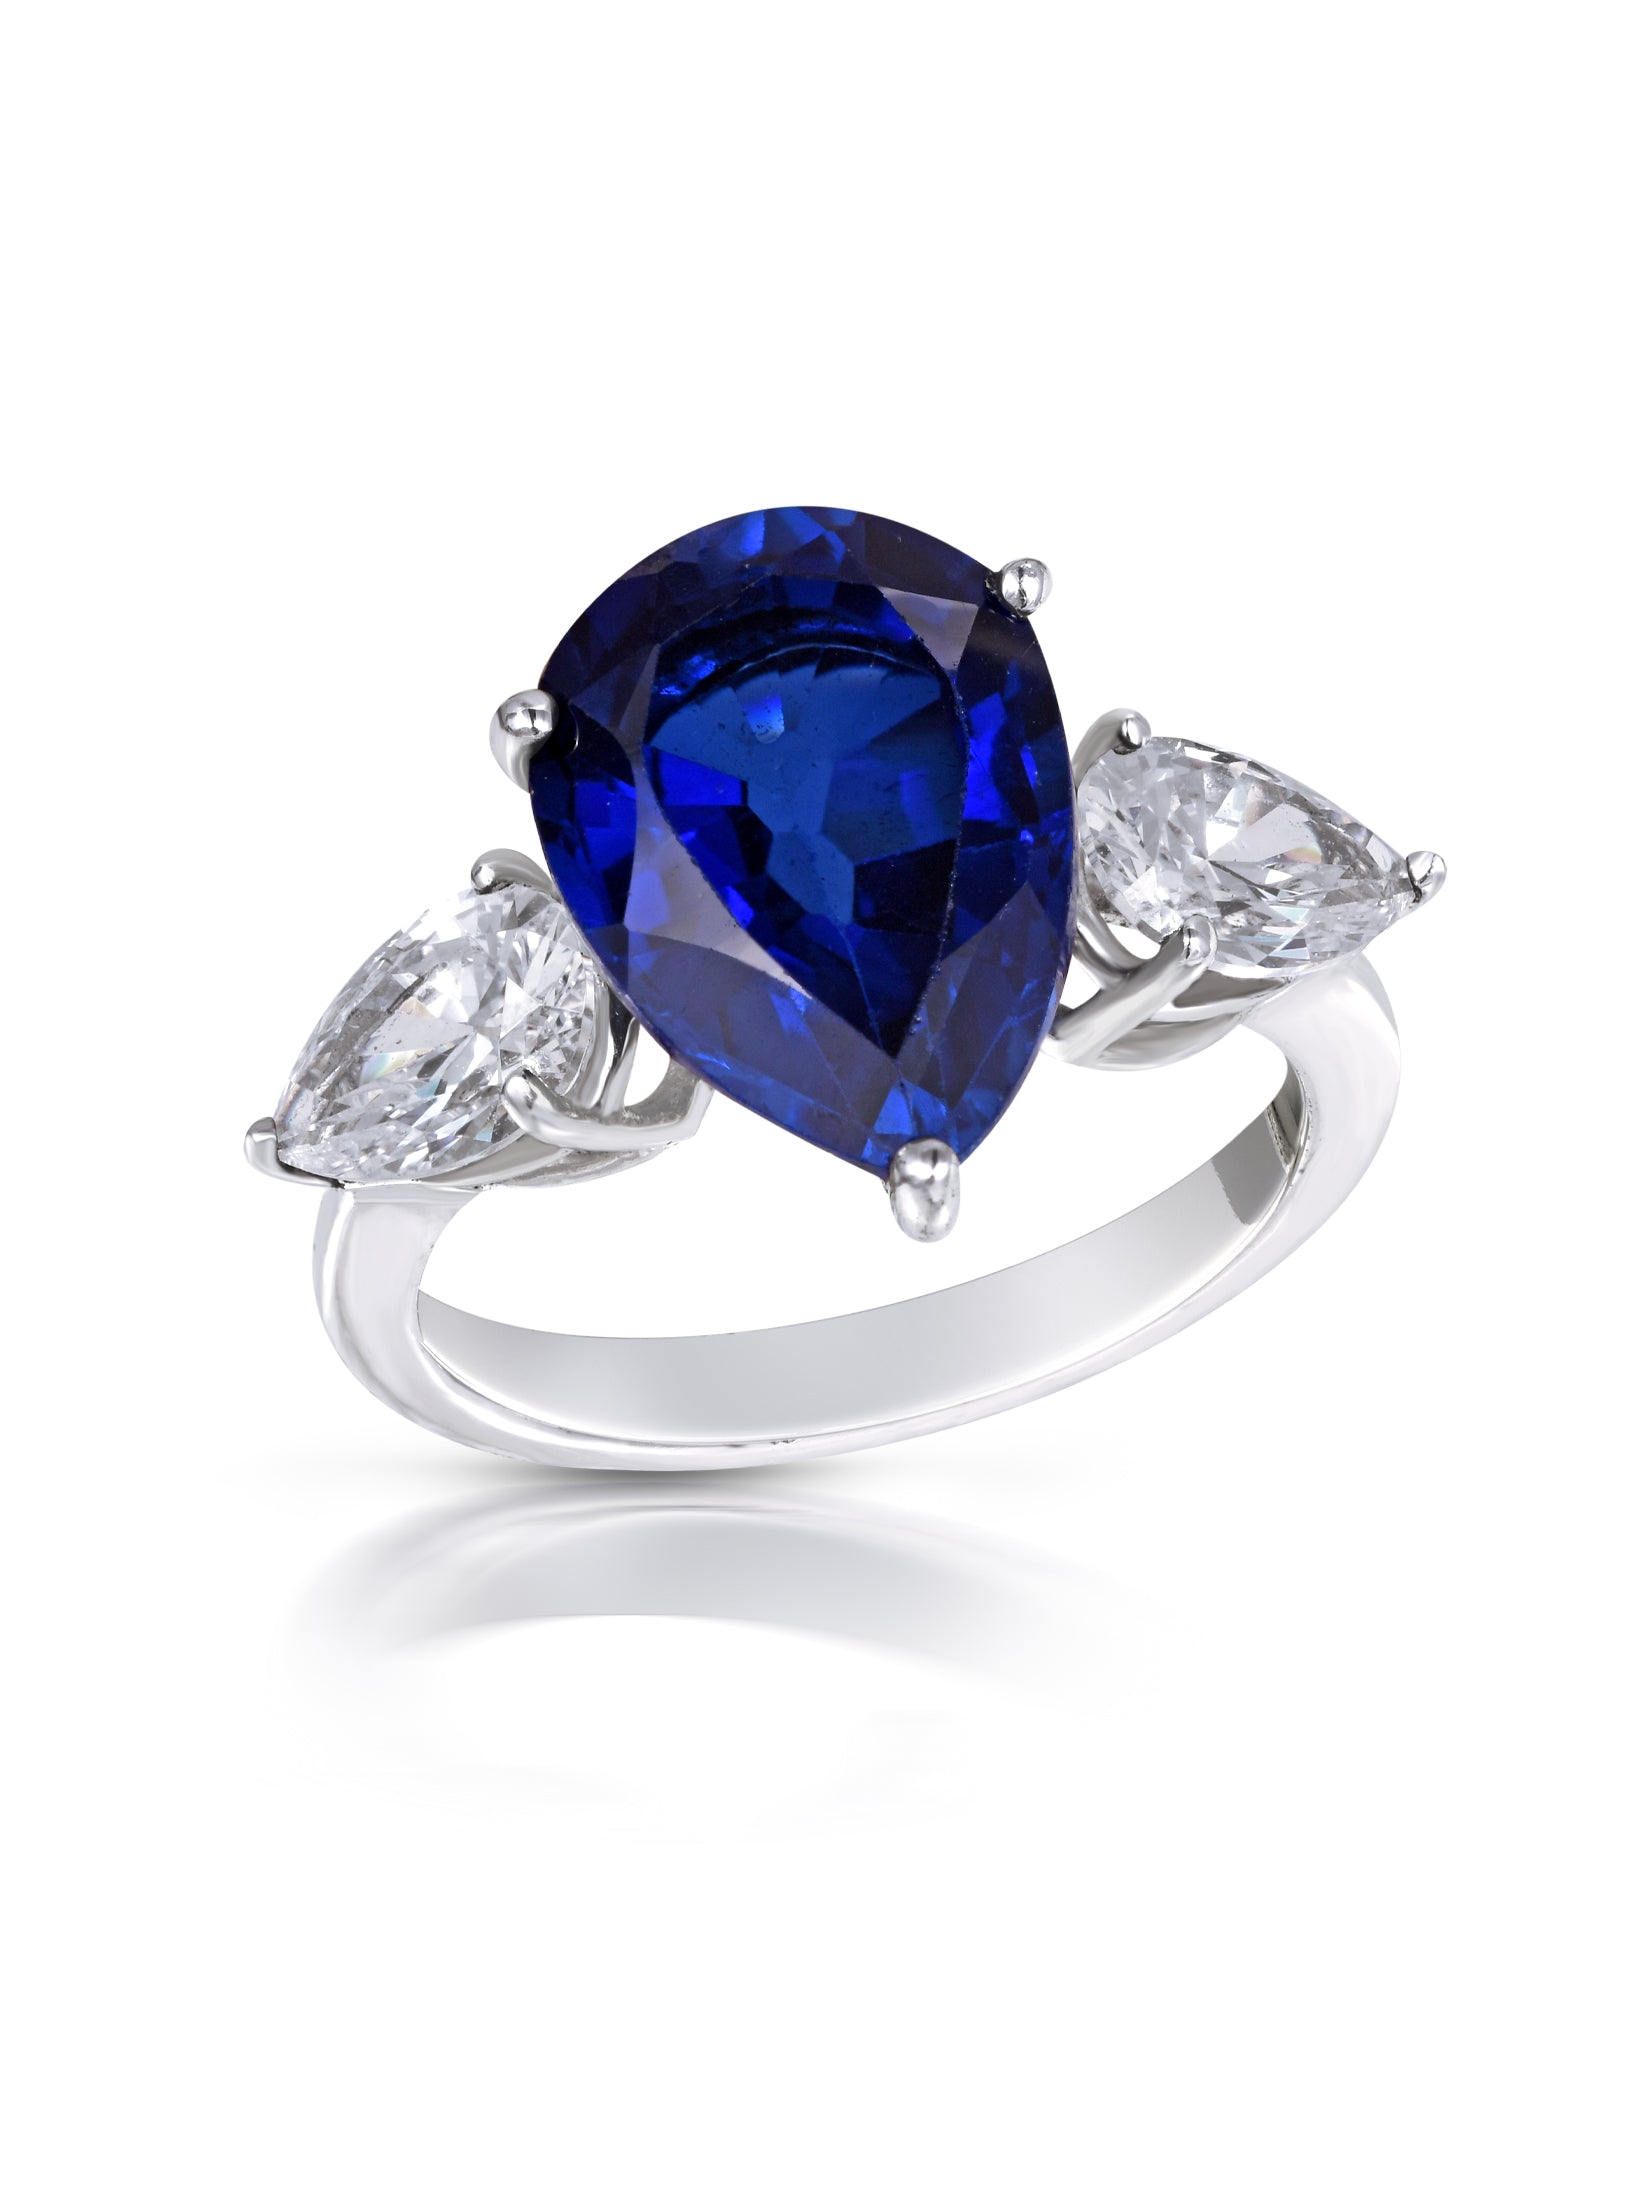 Blue and White Cocktail Ring